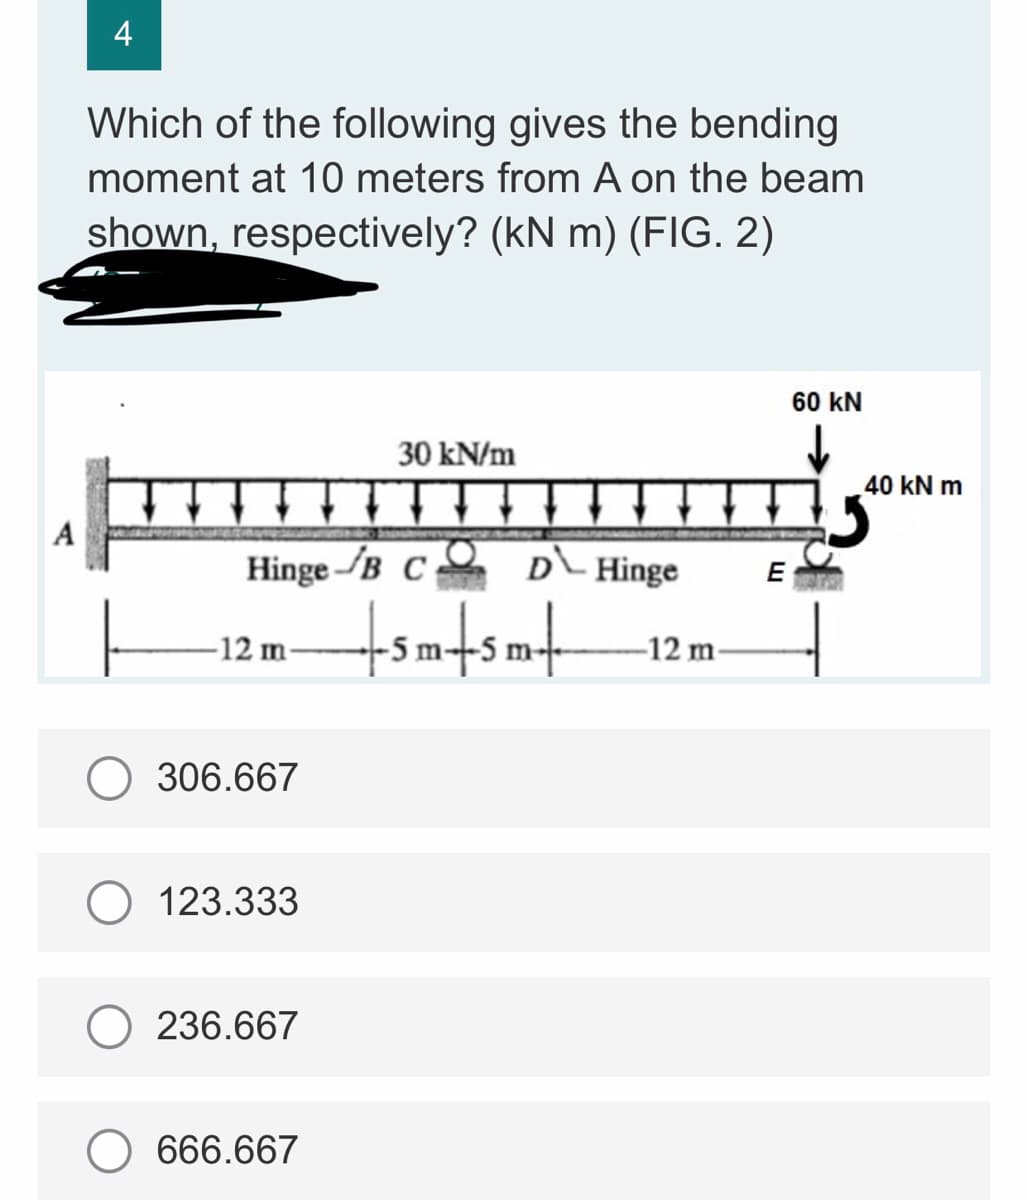 4
Which of the following gives the bending
moment at 10 meters from A on the beam
shown, respectively? (kN m) (FIG. 2)
60 KN
30 kN/m
7
A
Hinge B CO
E
-12 m-
306.667
123.333
236.667
666.667
D Hinge
+sm+sm+
-12 m-
40 kN m
5